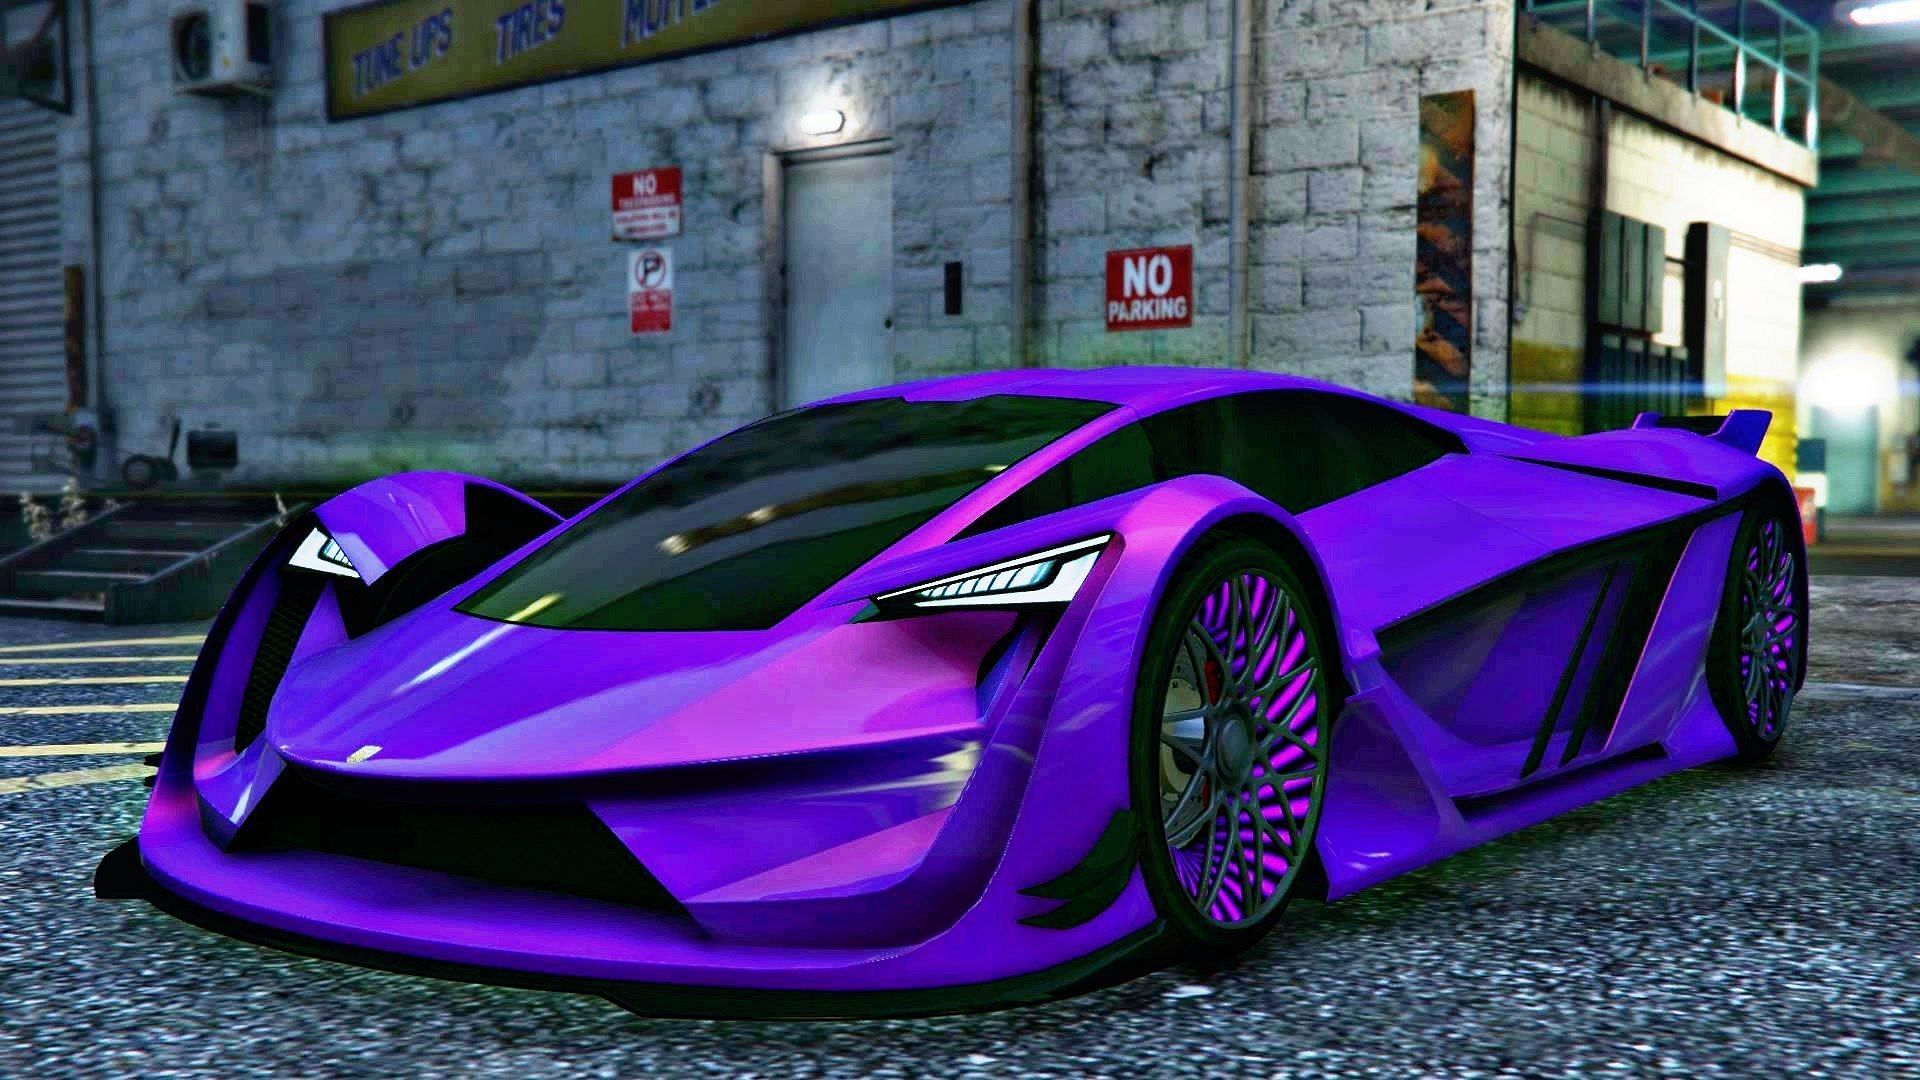 GTA Online&#039;s Pegassi Tezeract is one of the few electric cars in the game (Image via Twitter/Hidden_Leaf_GTA)